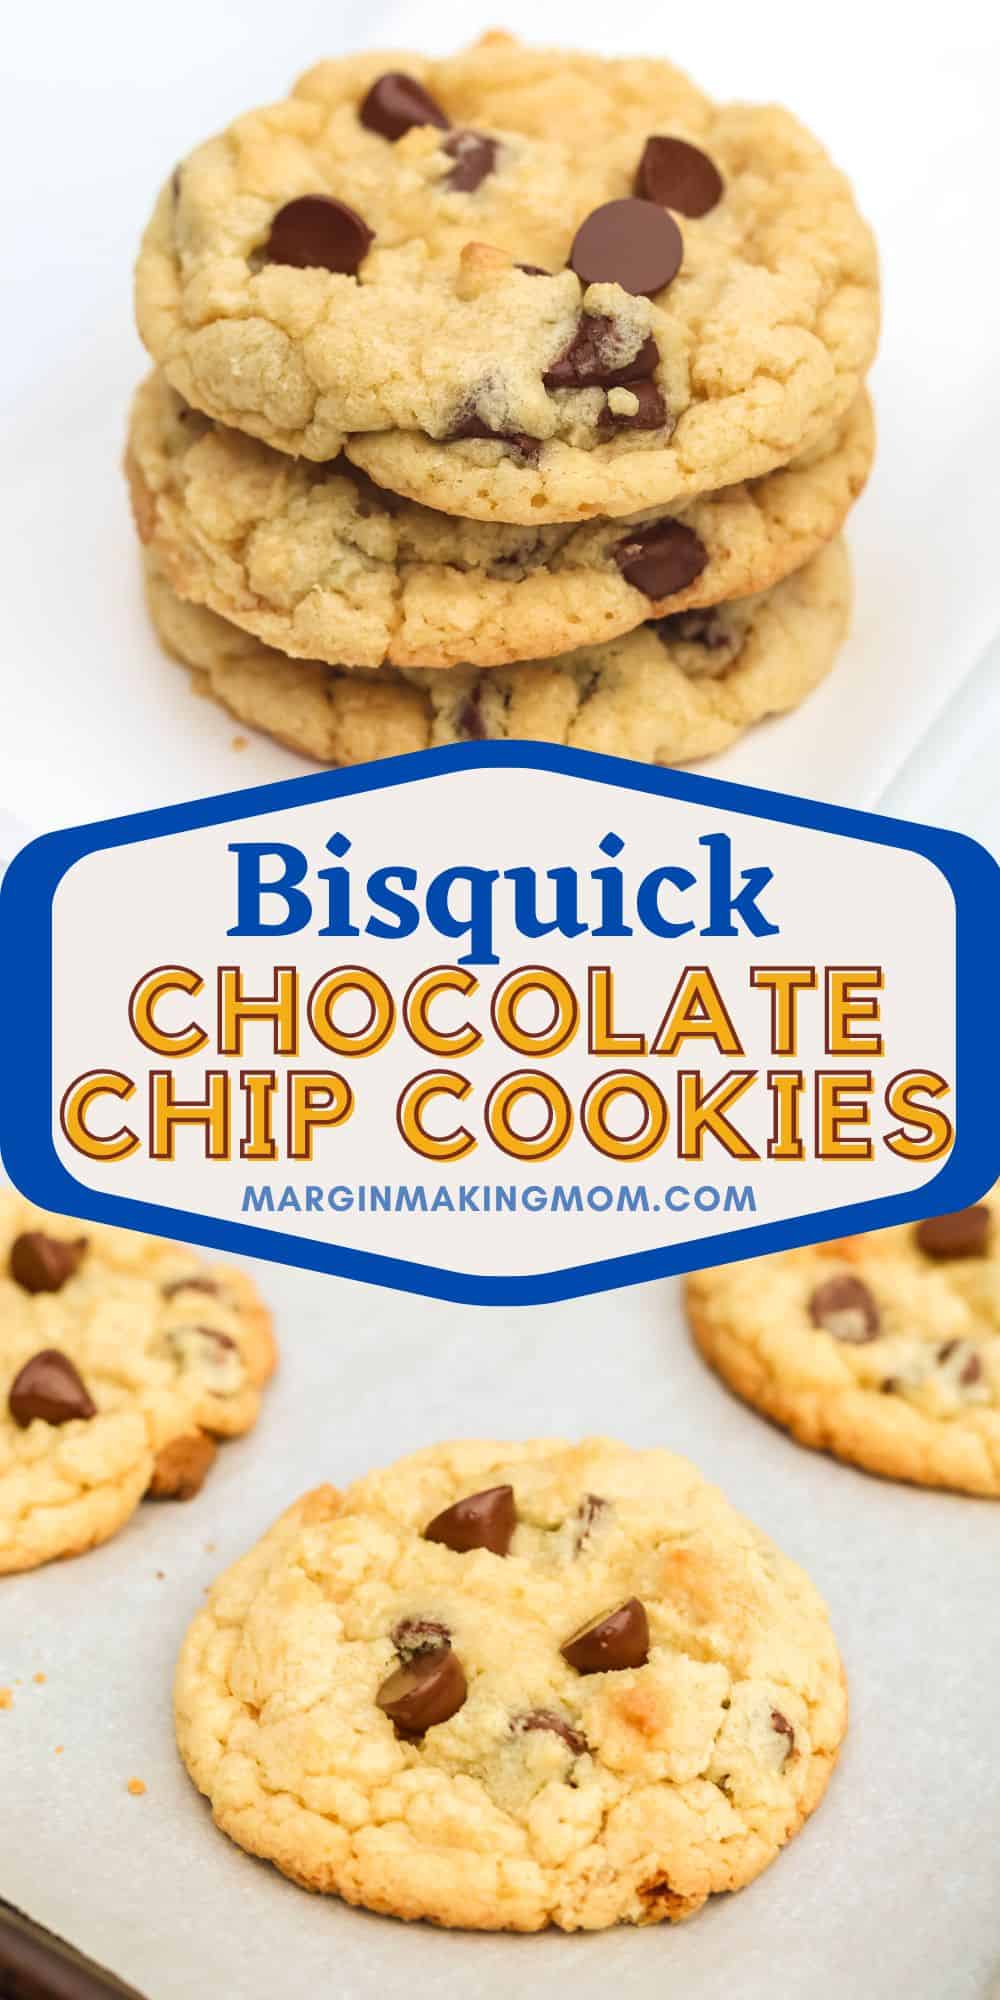 two photos; one shows a stack of Bisquick chocolate chip cookies, the other shows cookies on a pan fresh out of the oven.